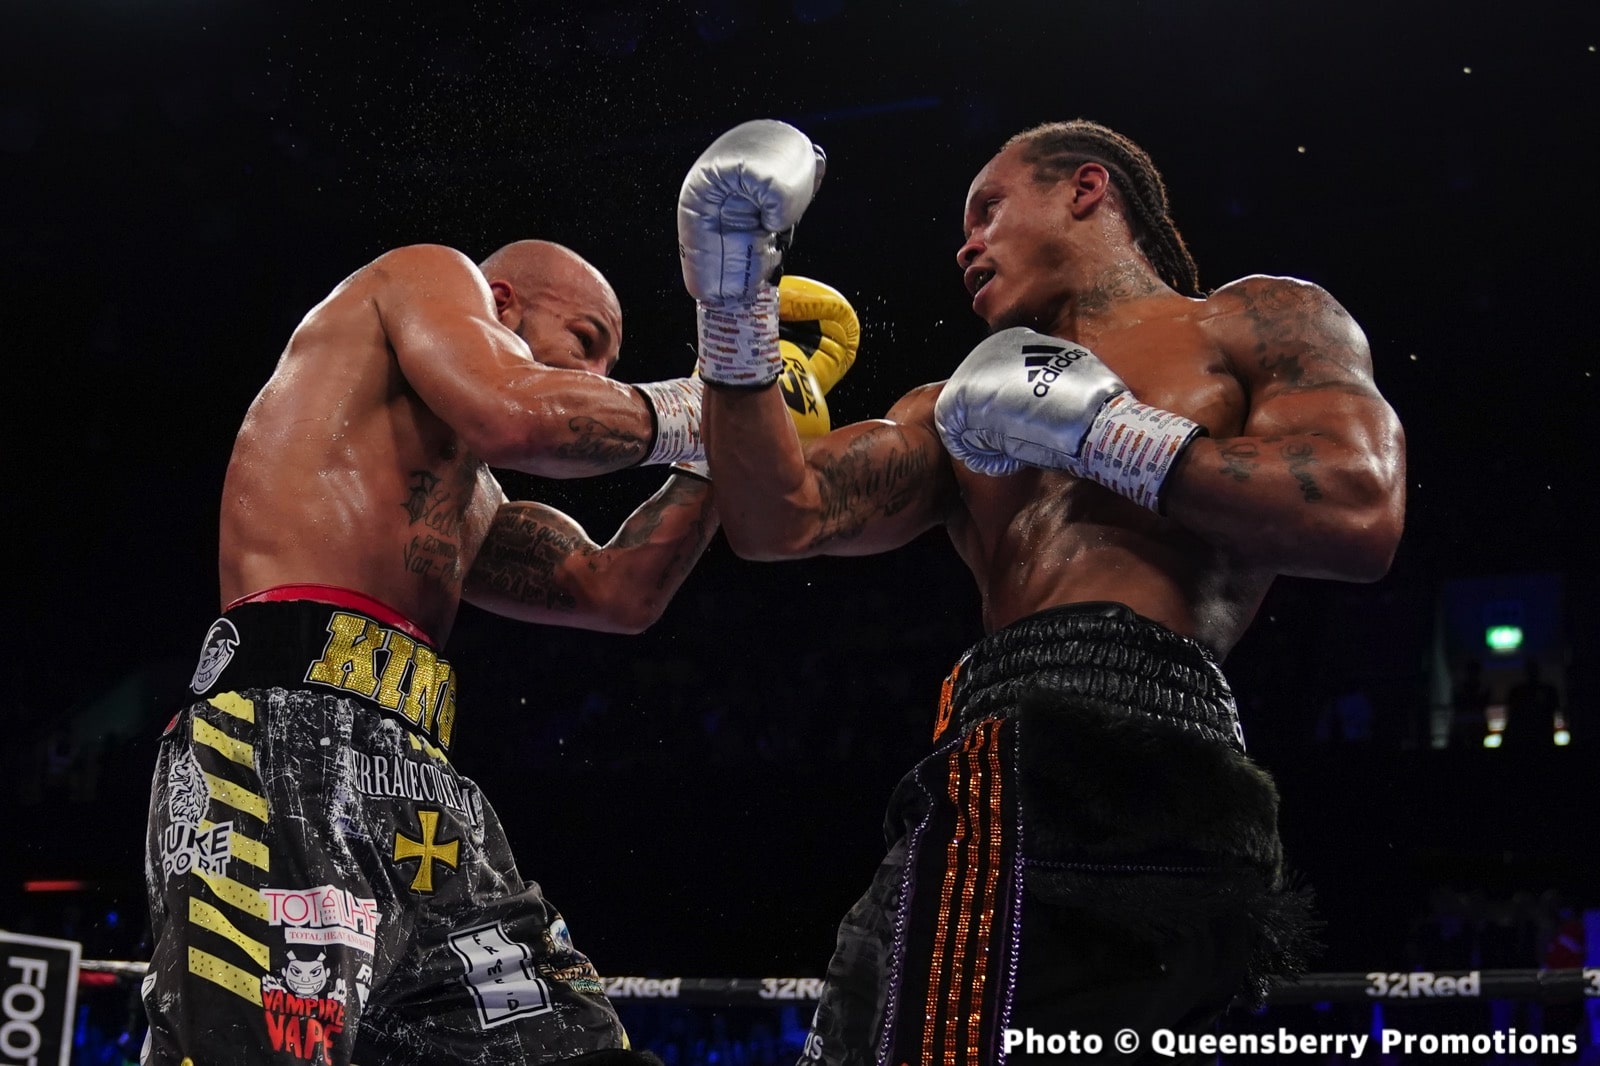 O2 Arena booked for Artur Beterbiev vs. Anthony Yarde in London for October